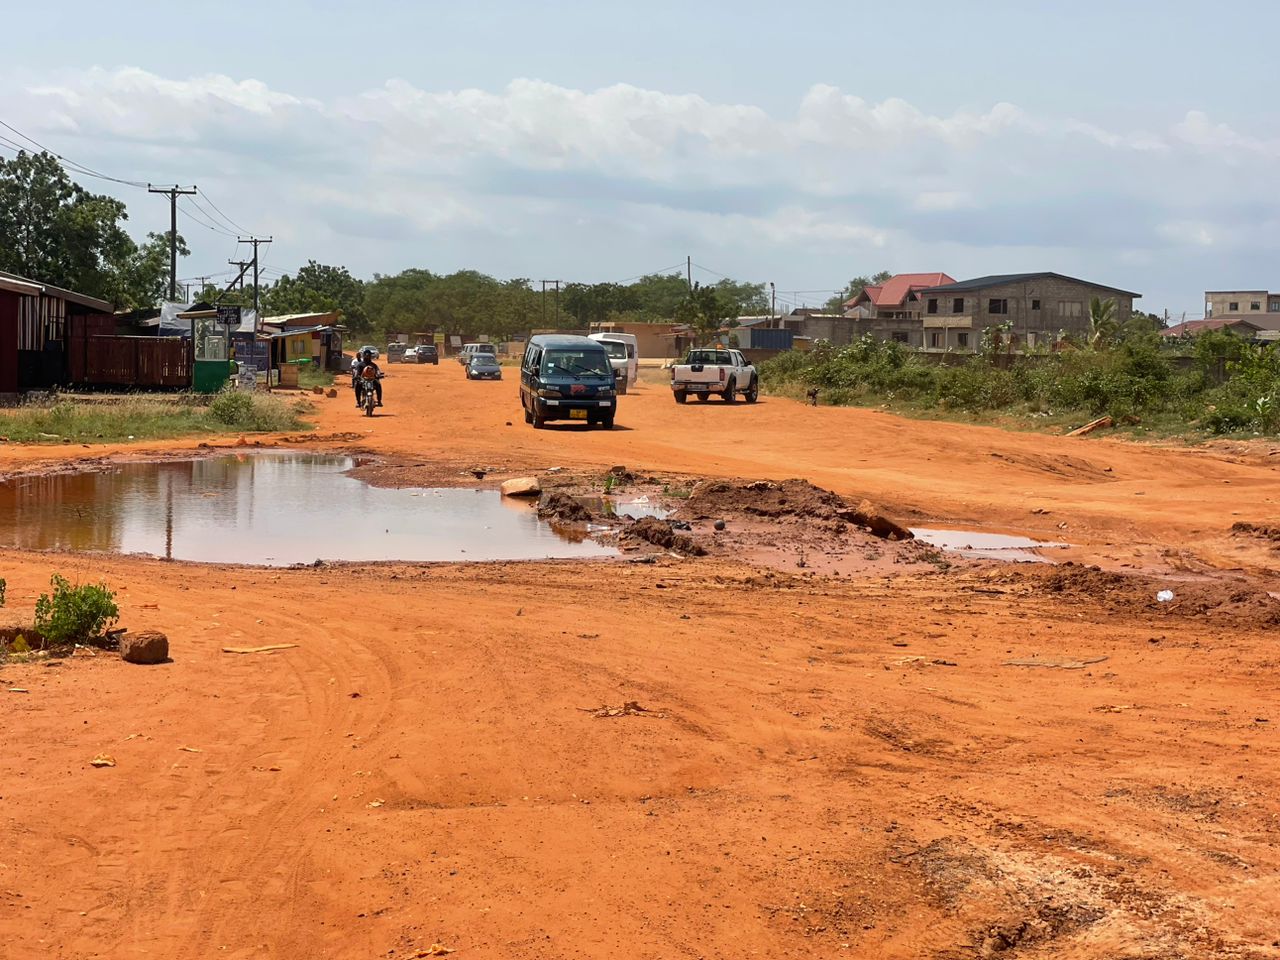 Gbetsile residents unhappy over deplorable roads; demand action from govt